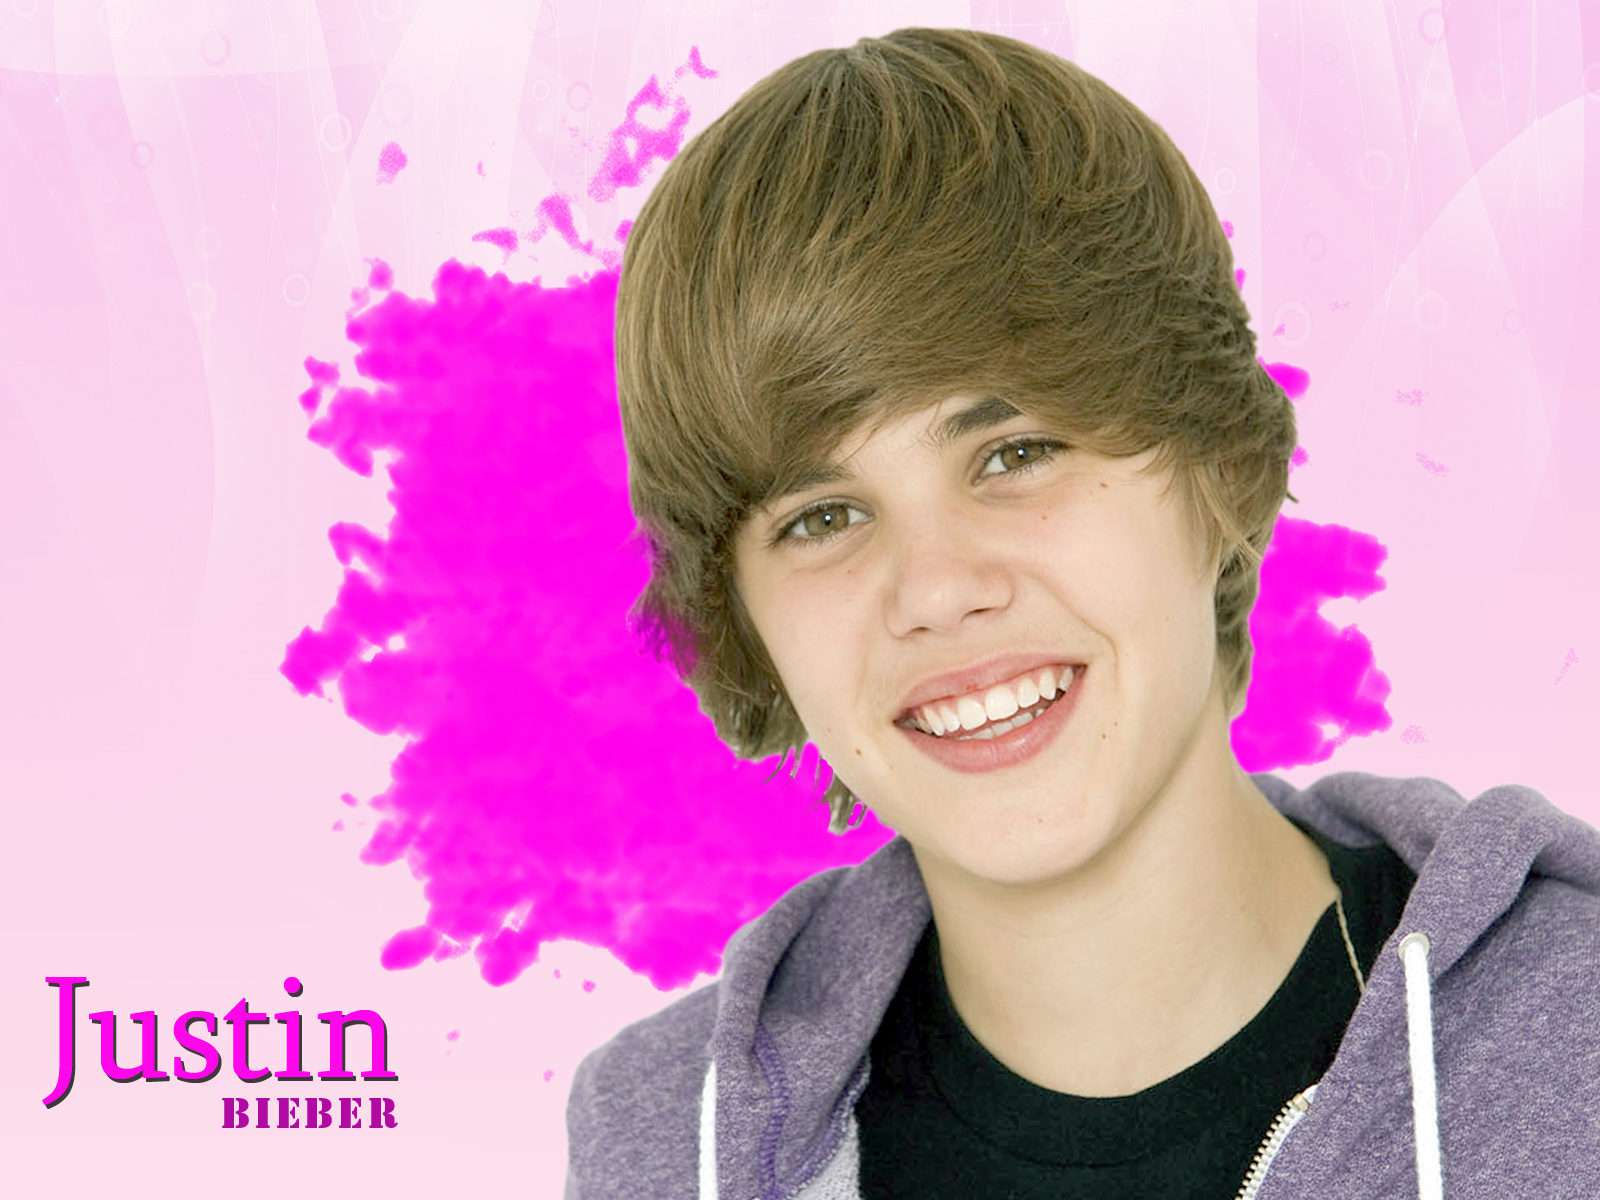 Justin Bieber 1080p HD Wallpaper For And